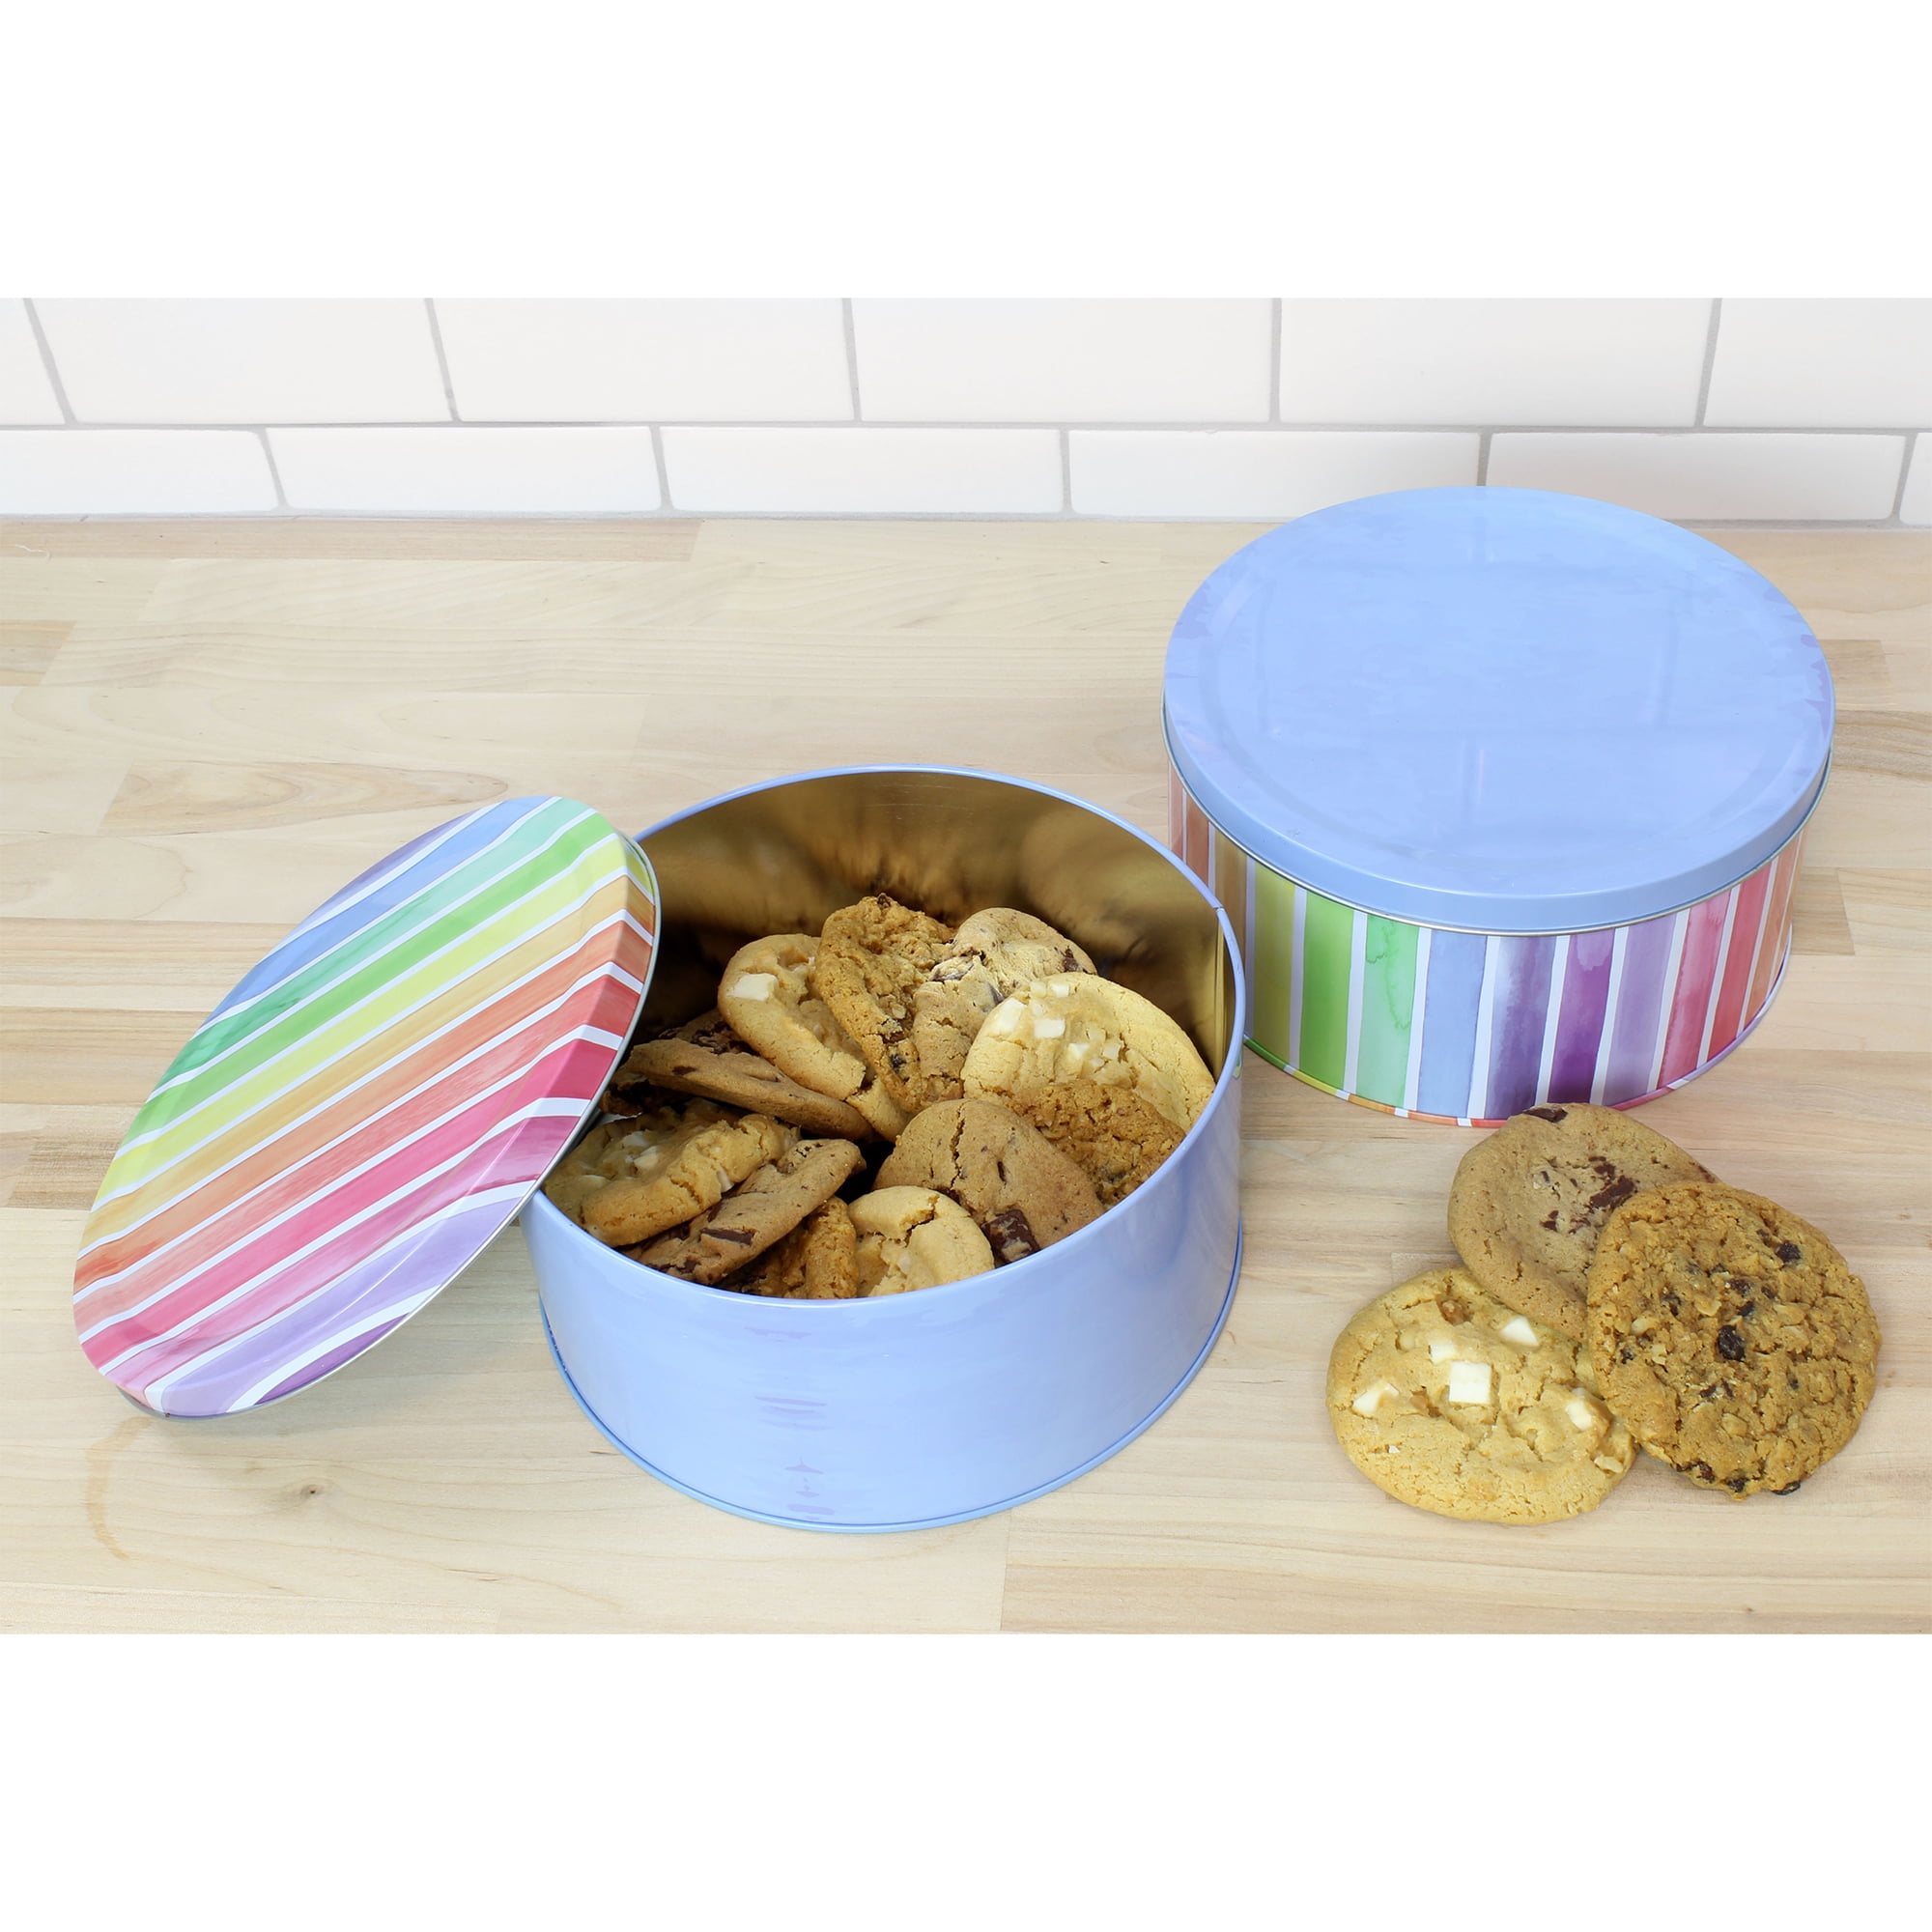 Decorae Black Chalkboard Cookie Tins (Set of 2); Round Baking and Cake Tins  for Special Occasion and Holiday, 7.75- Inch wide by 3.6-Inch Tall